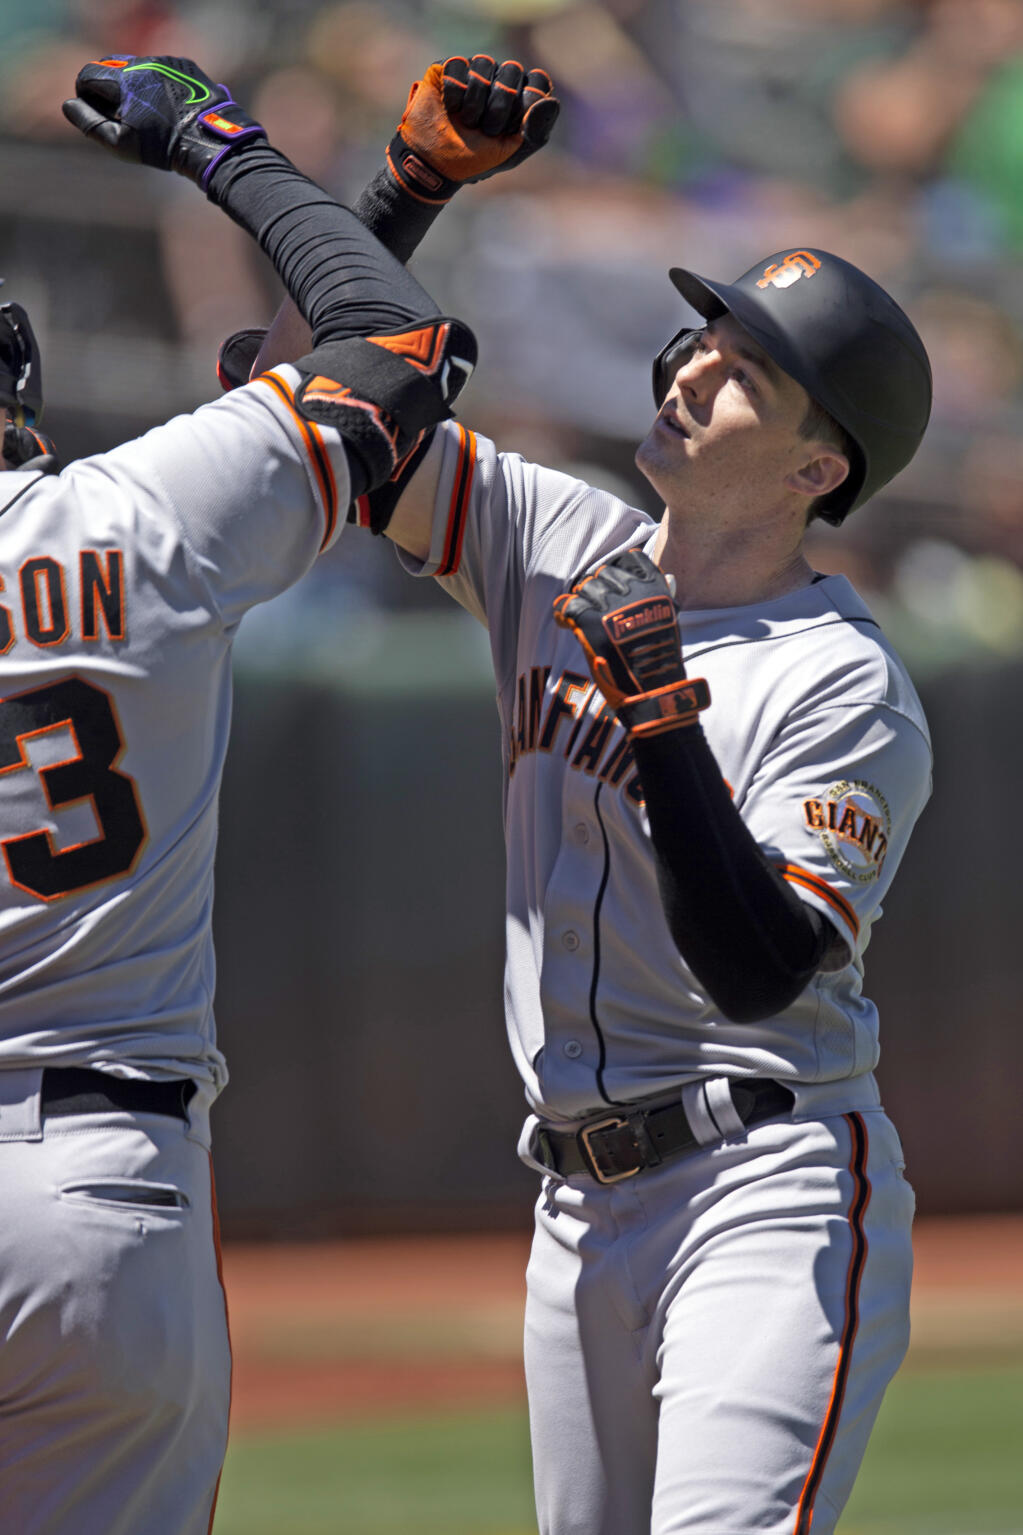 San Francisco Giants' Mike Yastrzemski, right, celebrates his solo home run with teammate Joc Pederson during the third inning of a baseball game against the Oakland Athletics, Sunday, Aug. 7, 2022, in Oakland, Calif. (AP Photo/D. Ross Cameron)